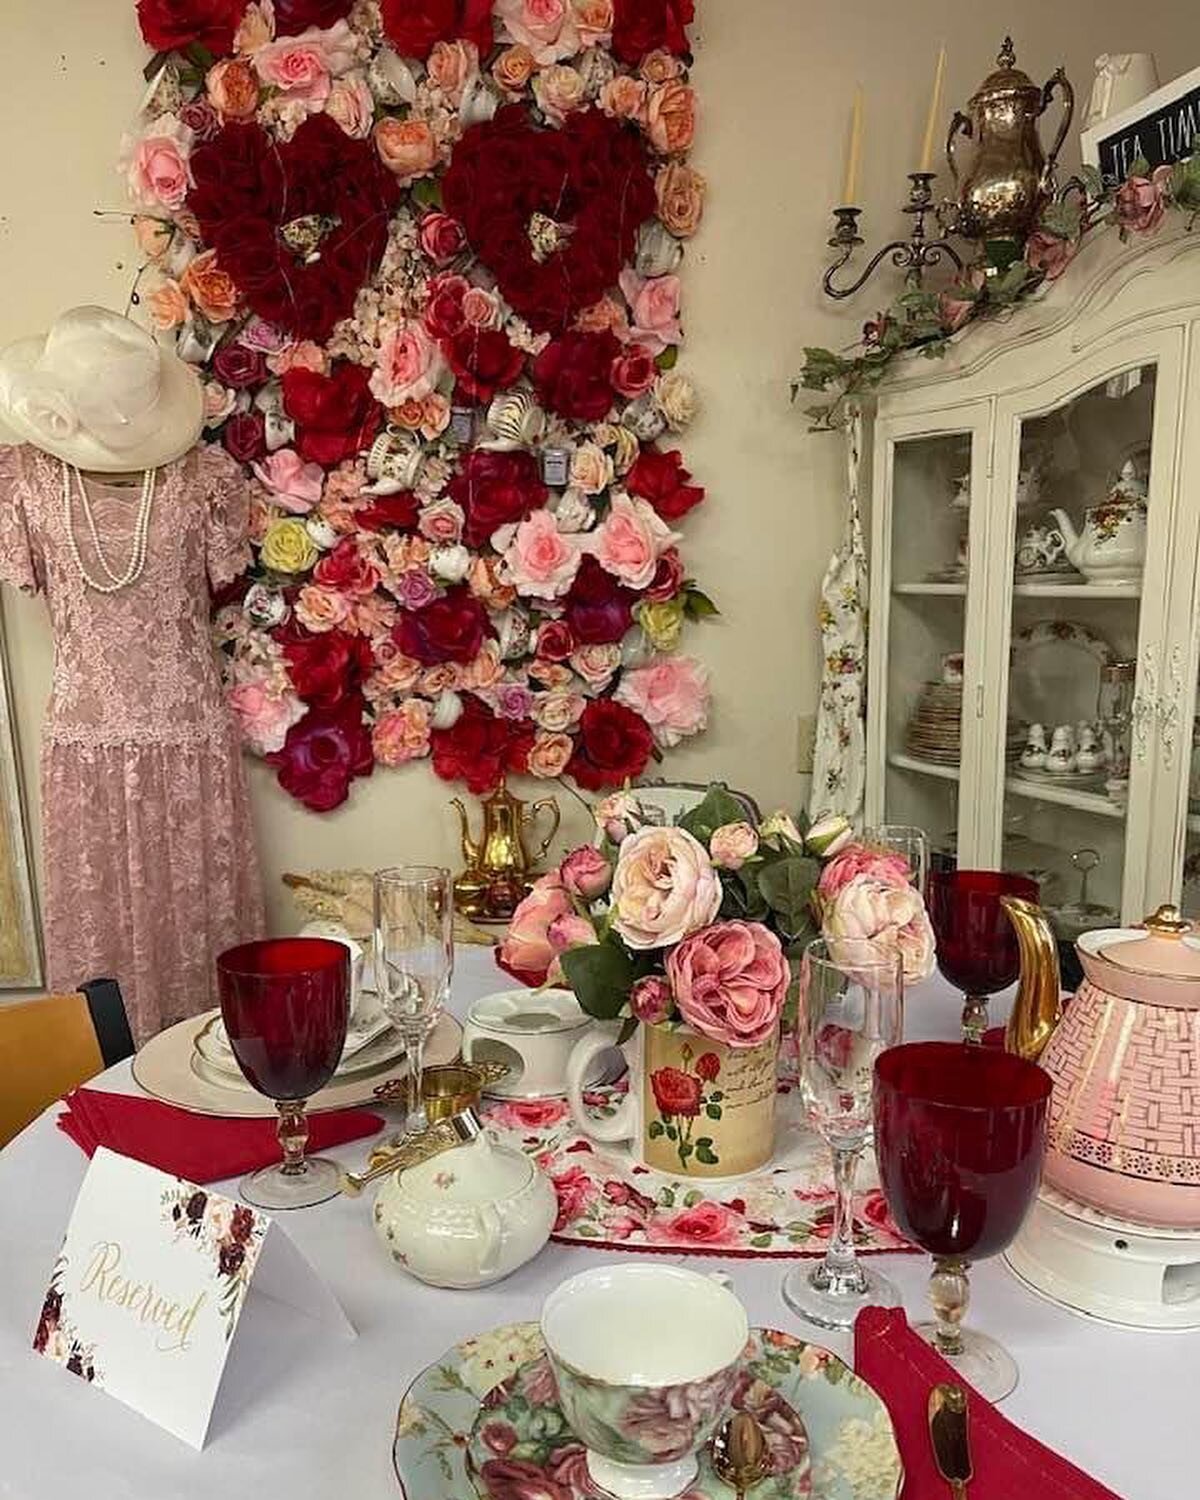 Check out our new decor 😍

The perfect setting for a Galentine&rsquo;s Day brunch or tea party 💝

Reserve yours today! 214-236-2623

#edylicioustearoom #tearoom #teaparty #afternoontea #hightea #teatime #brunch #desototx #valentines #galentinesday 